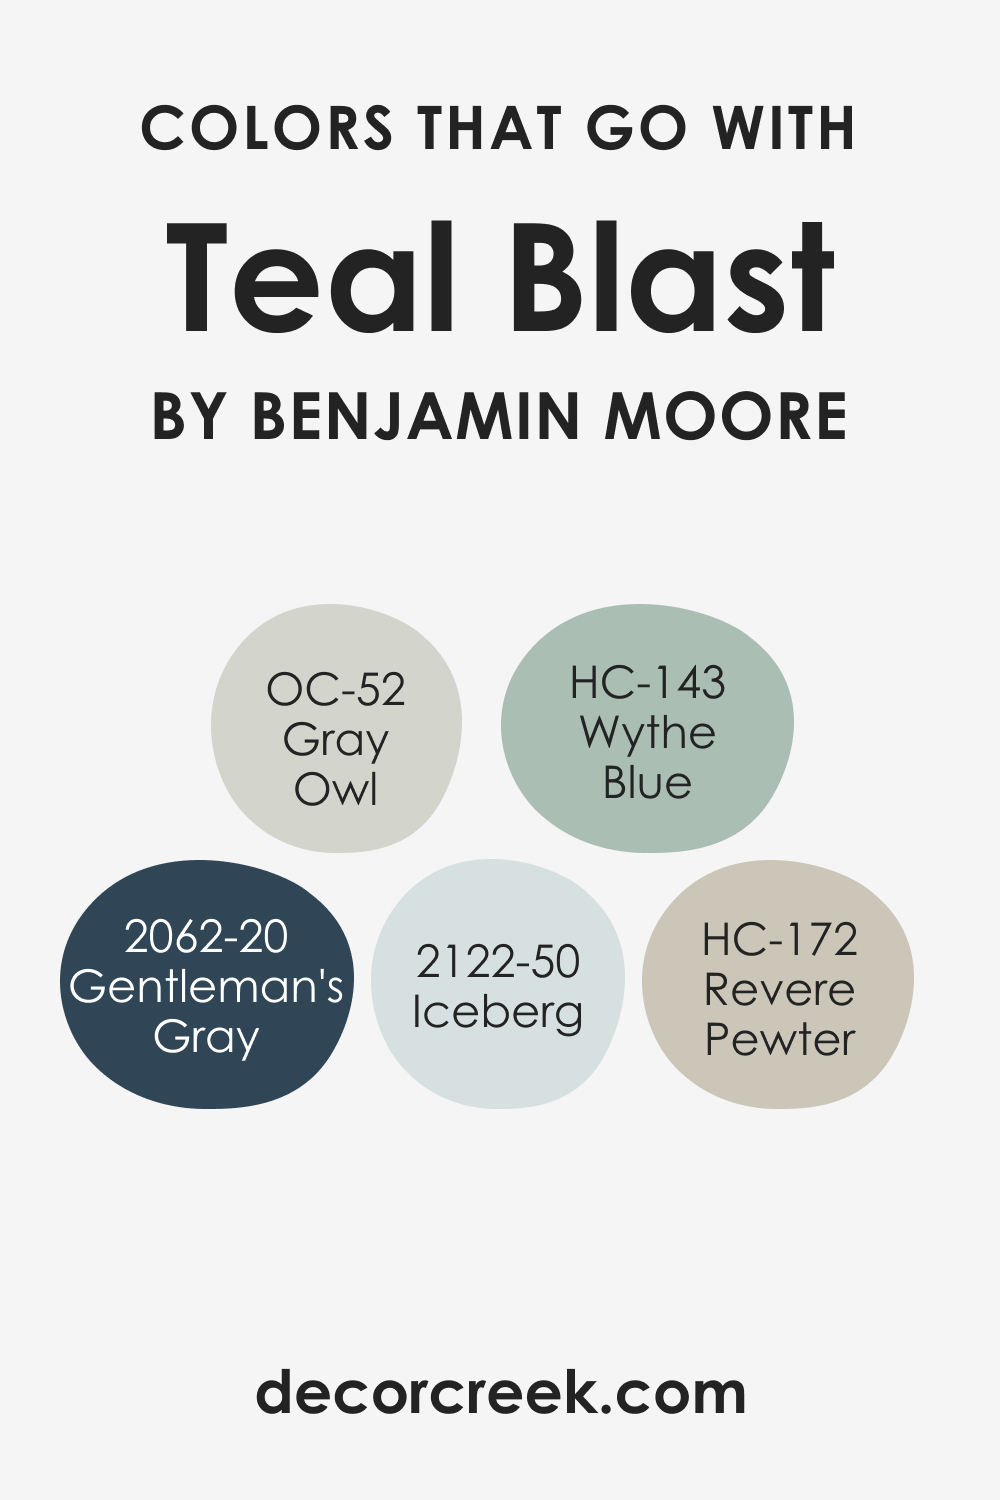 Colors That Go With Teal Blast 2039-40